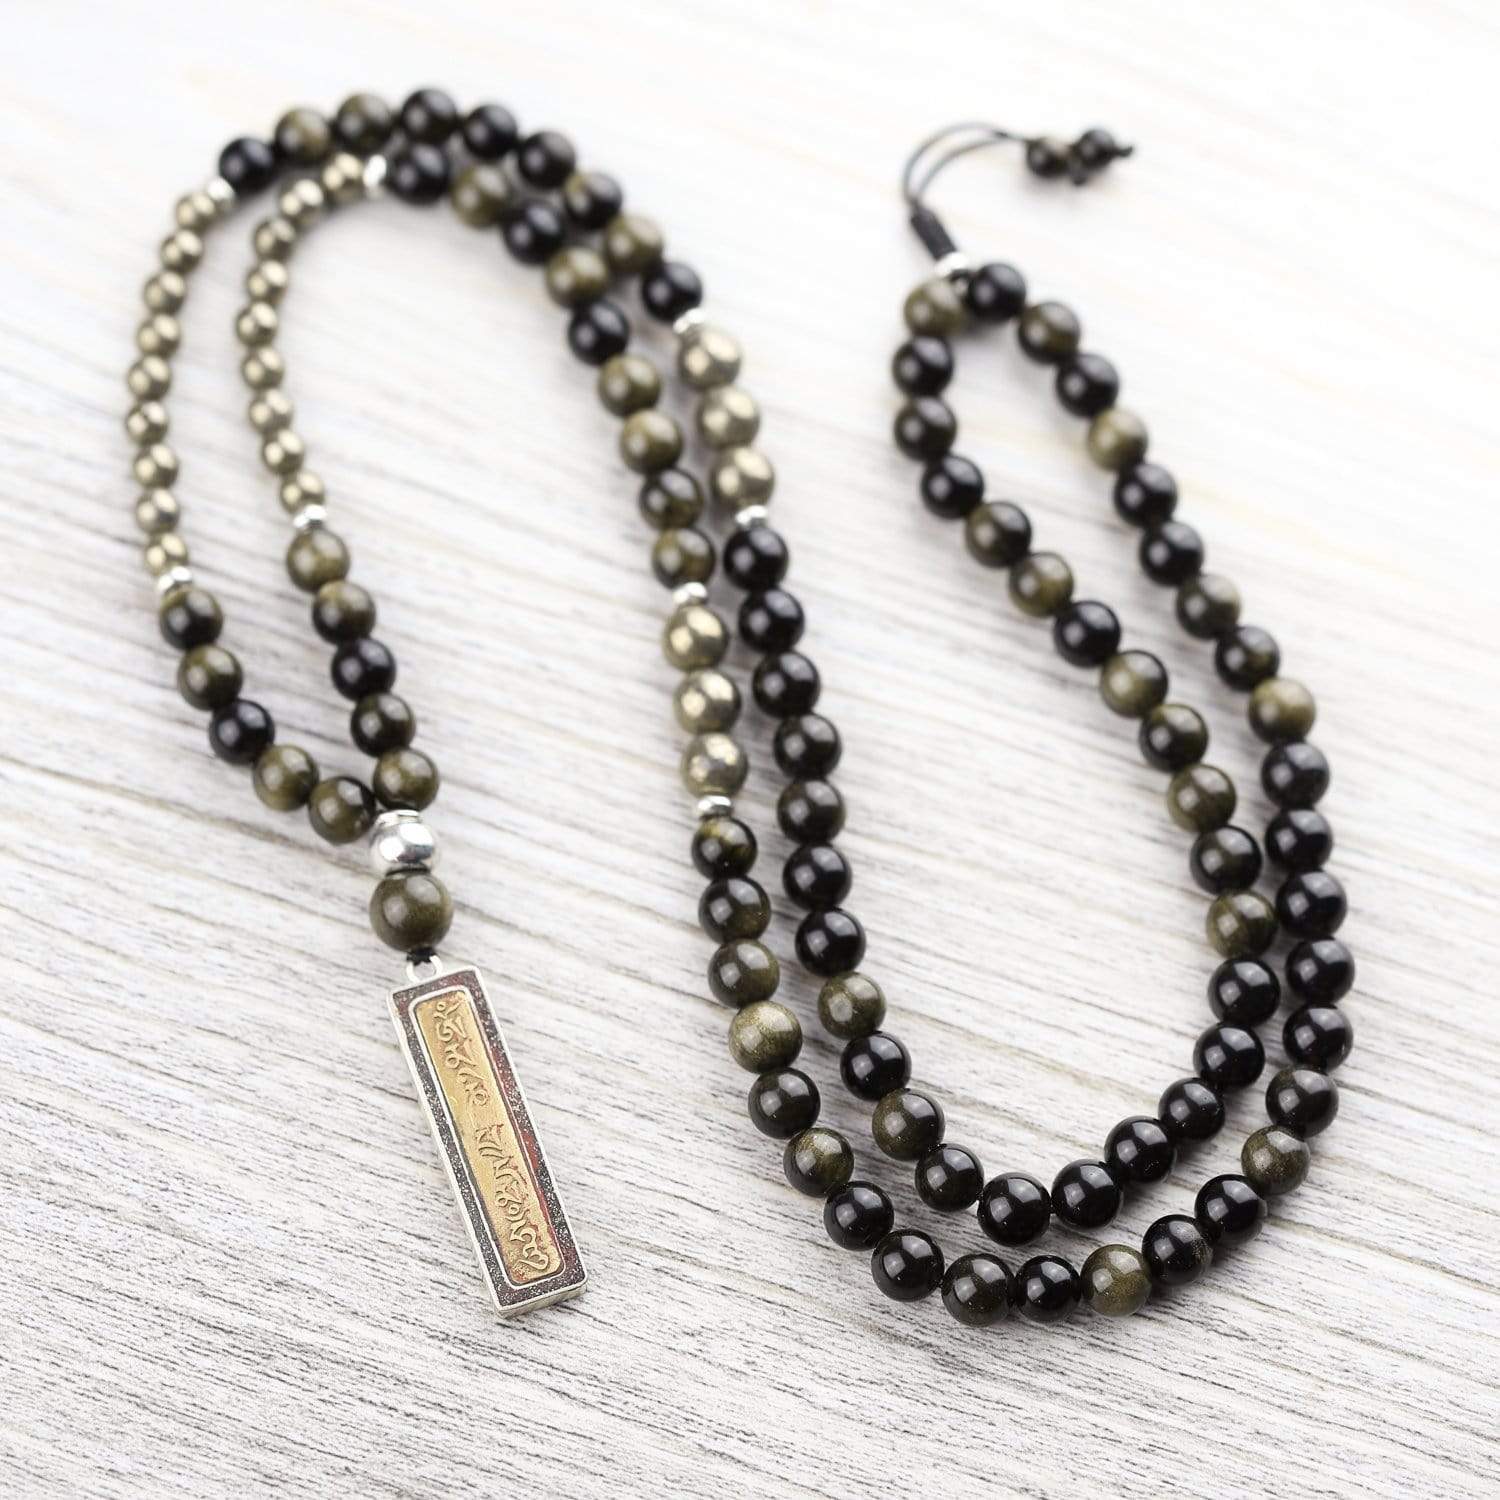 Natural Black Rainbow Obsidian Carved Tiger Pendant+ Beads Necklace | eBay